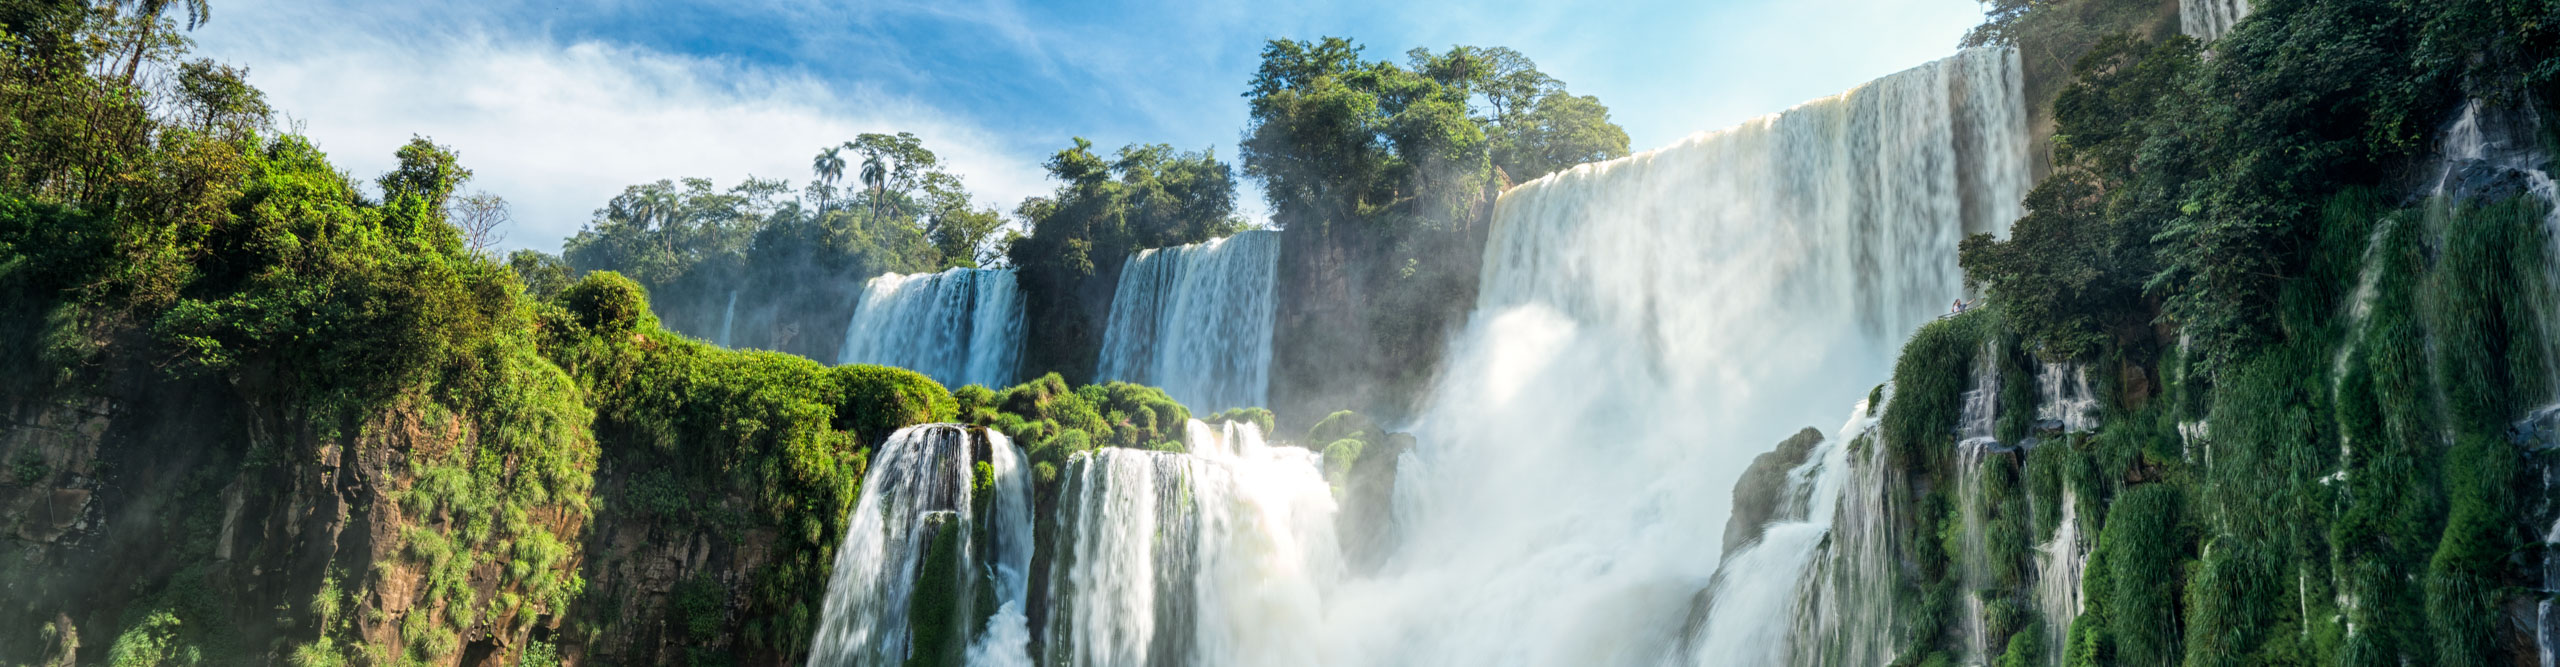 Water rushing over the falls at Iguaza Falls, on a sunny day, Argentina